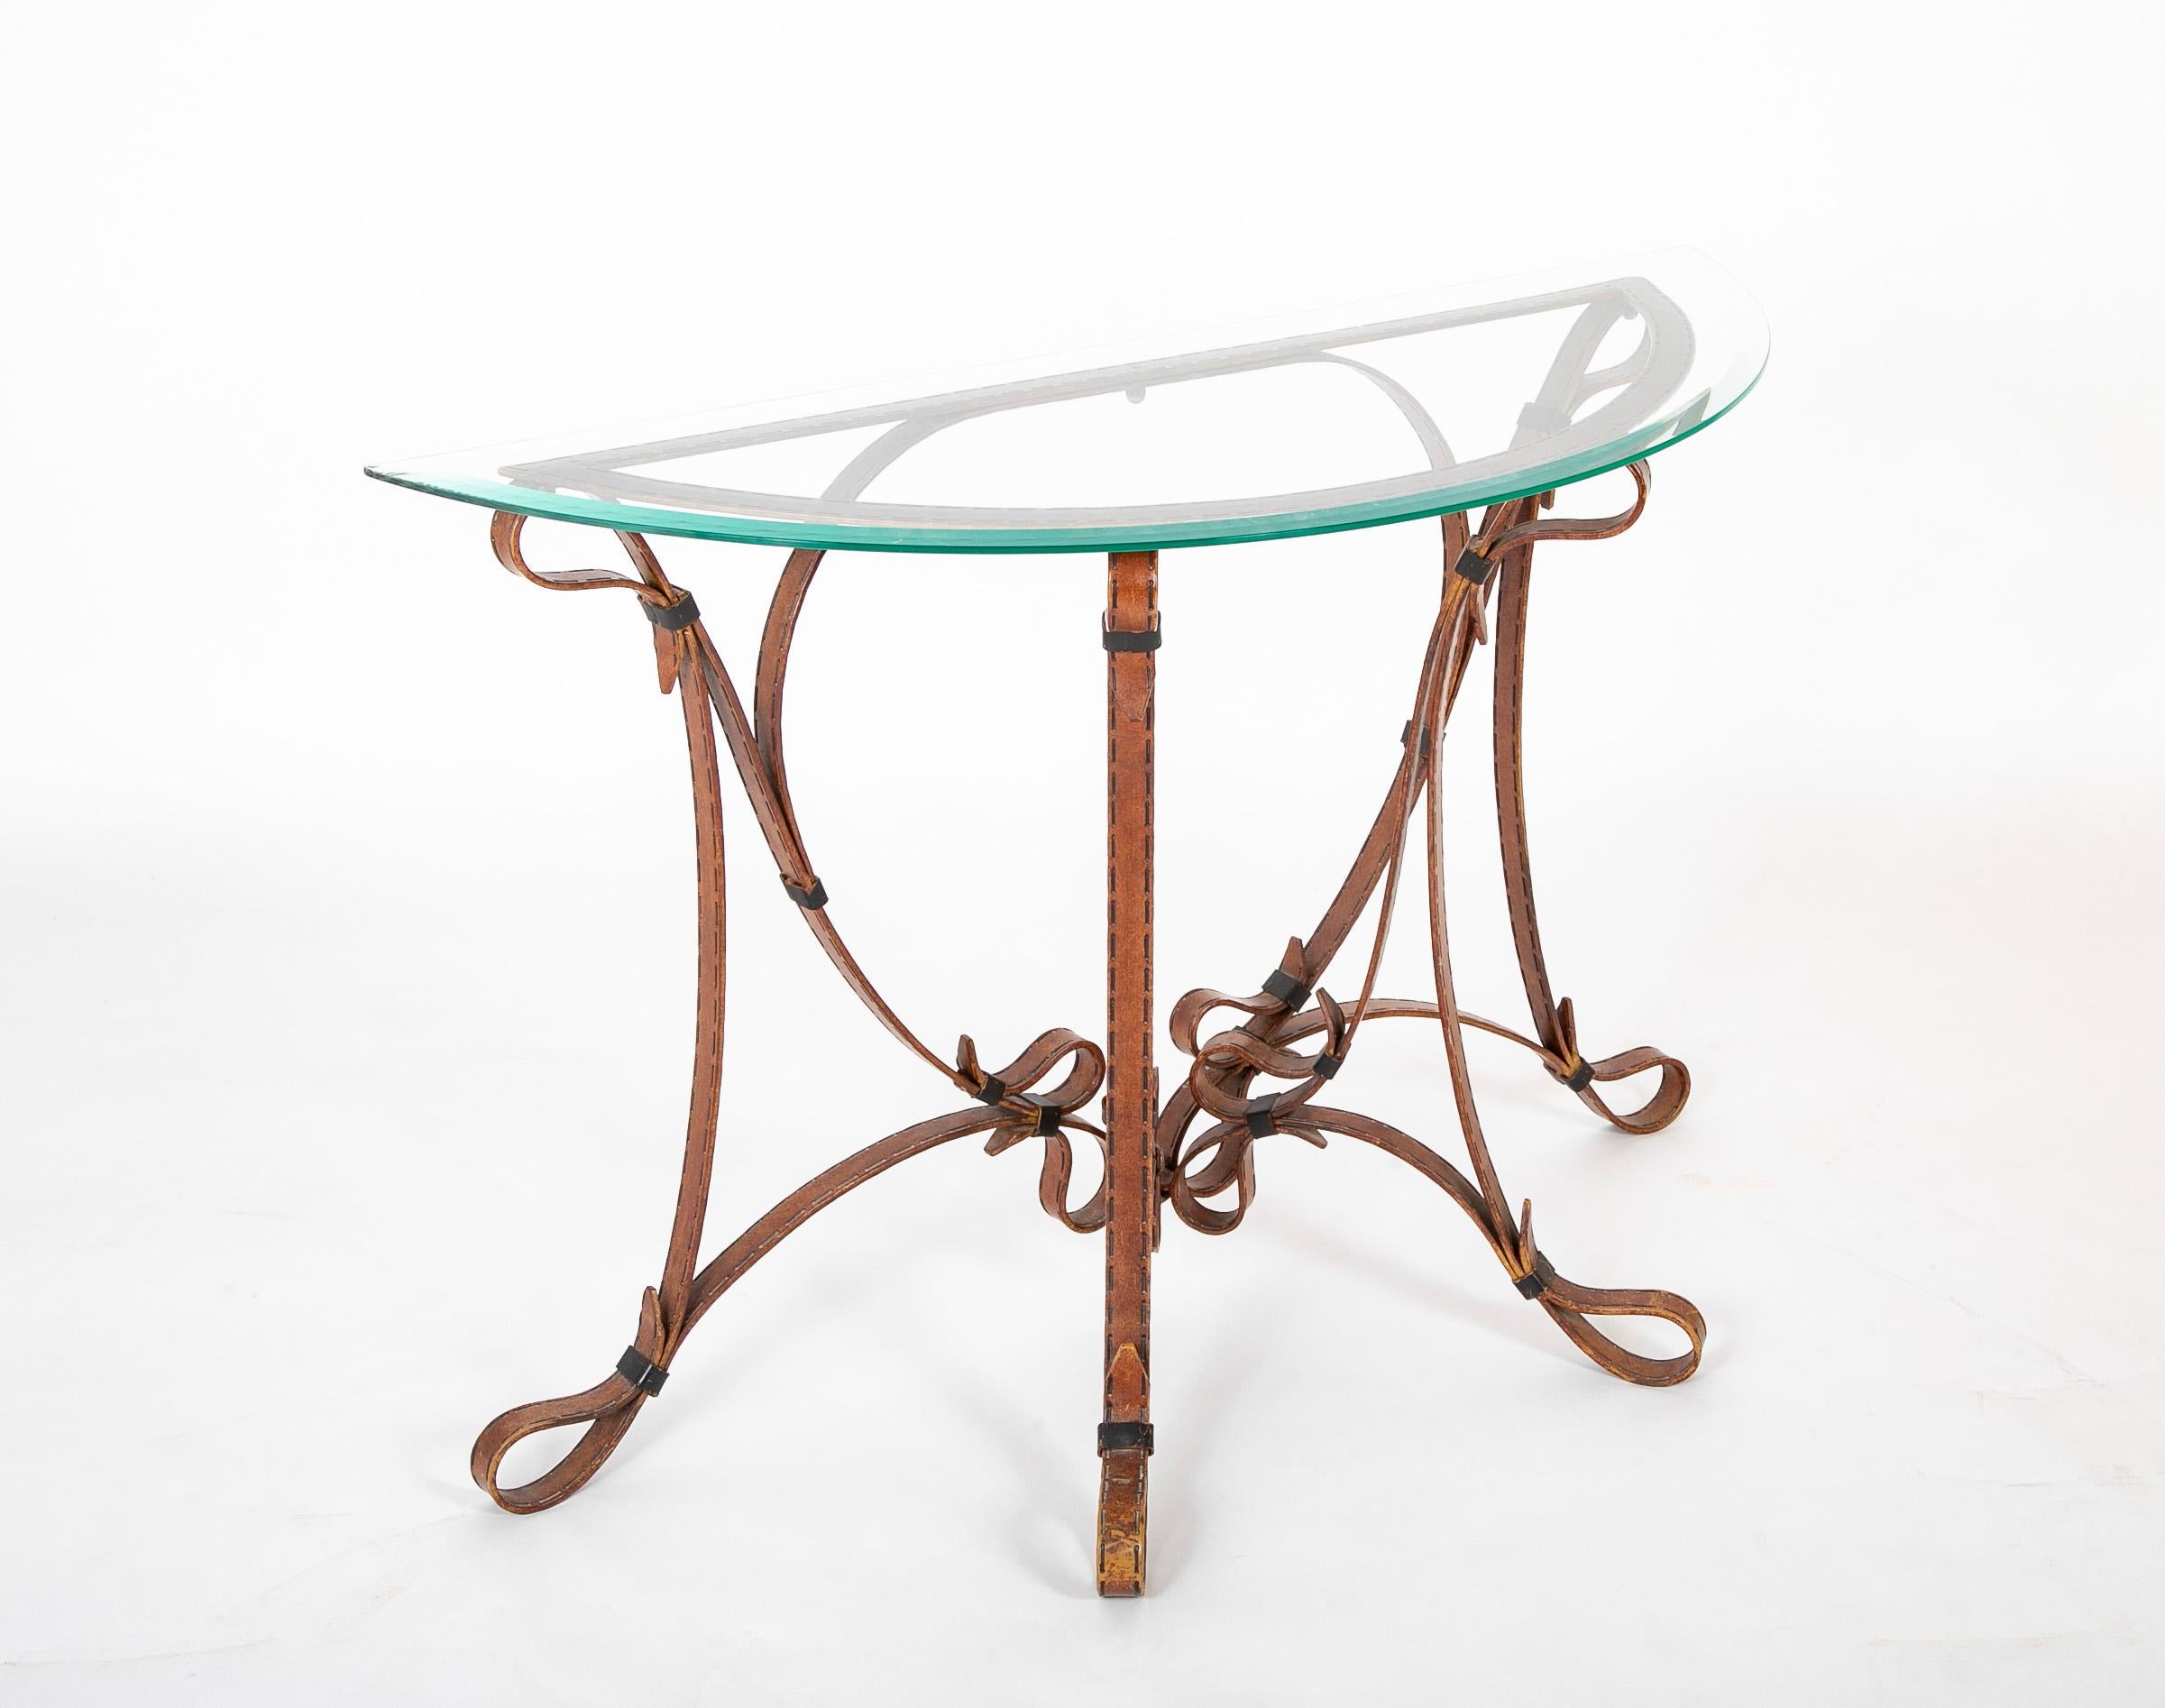 Unusual and quite attractive wrought iron console table with a faux leather finish imitating belt-like straps curling and intersecting to make up the base. A very realistic finish, down to the faux stitching running along the straps. A custom piece